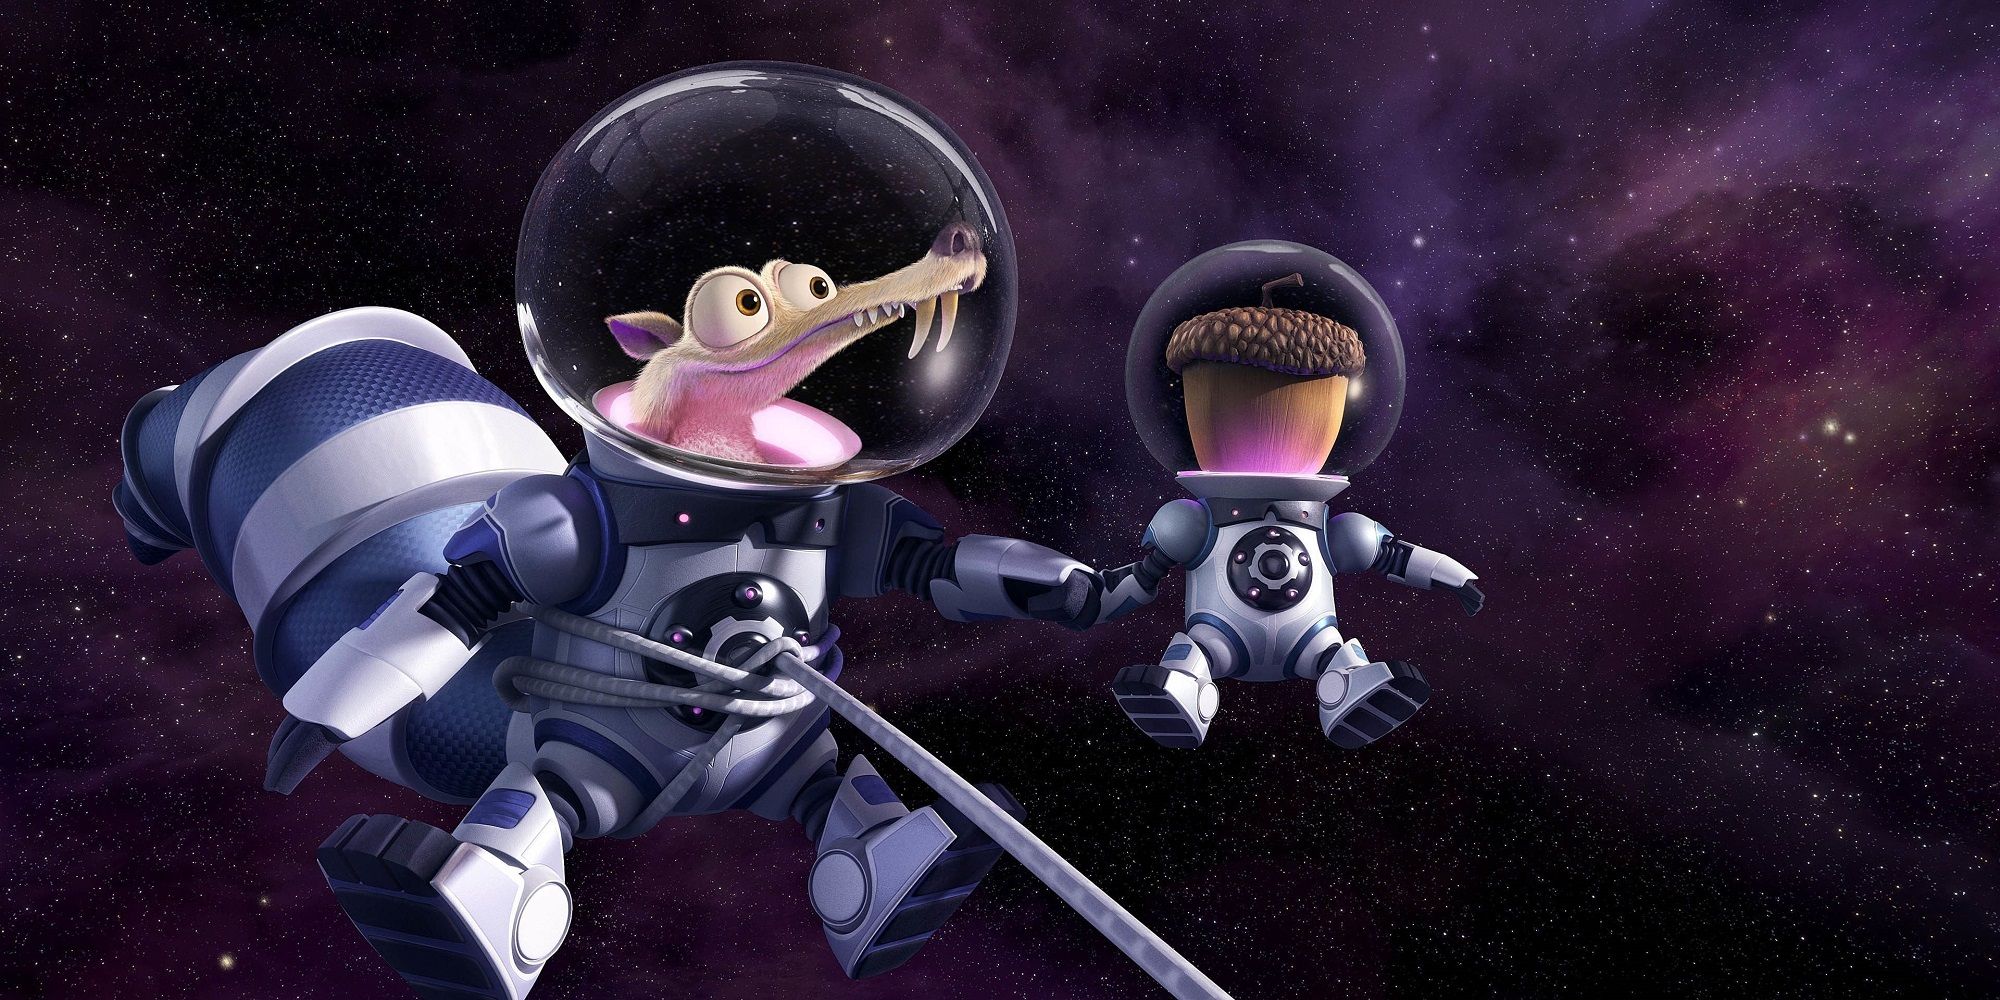 Scrat in floating in space with his acorn in Ice Age Collision Course